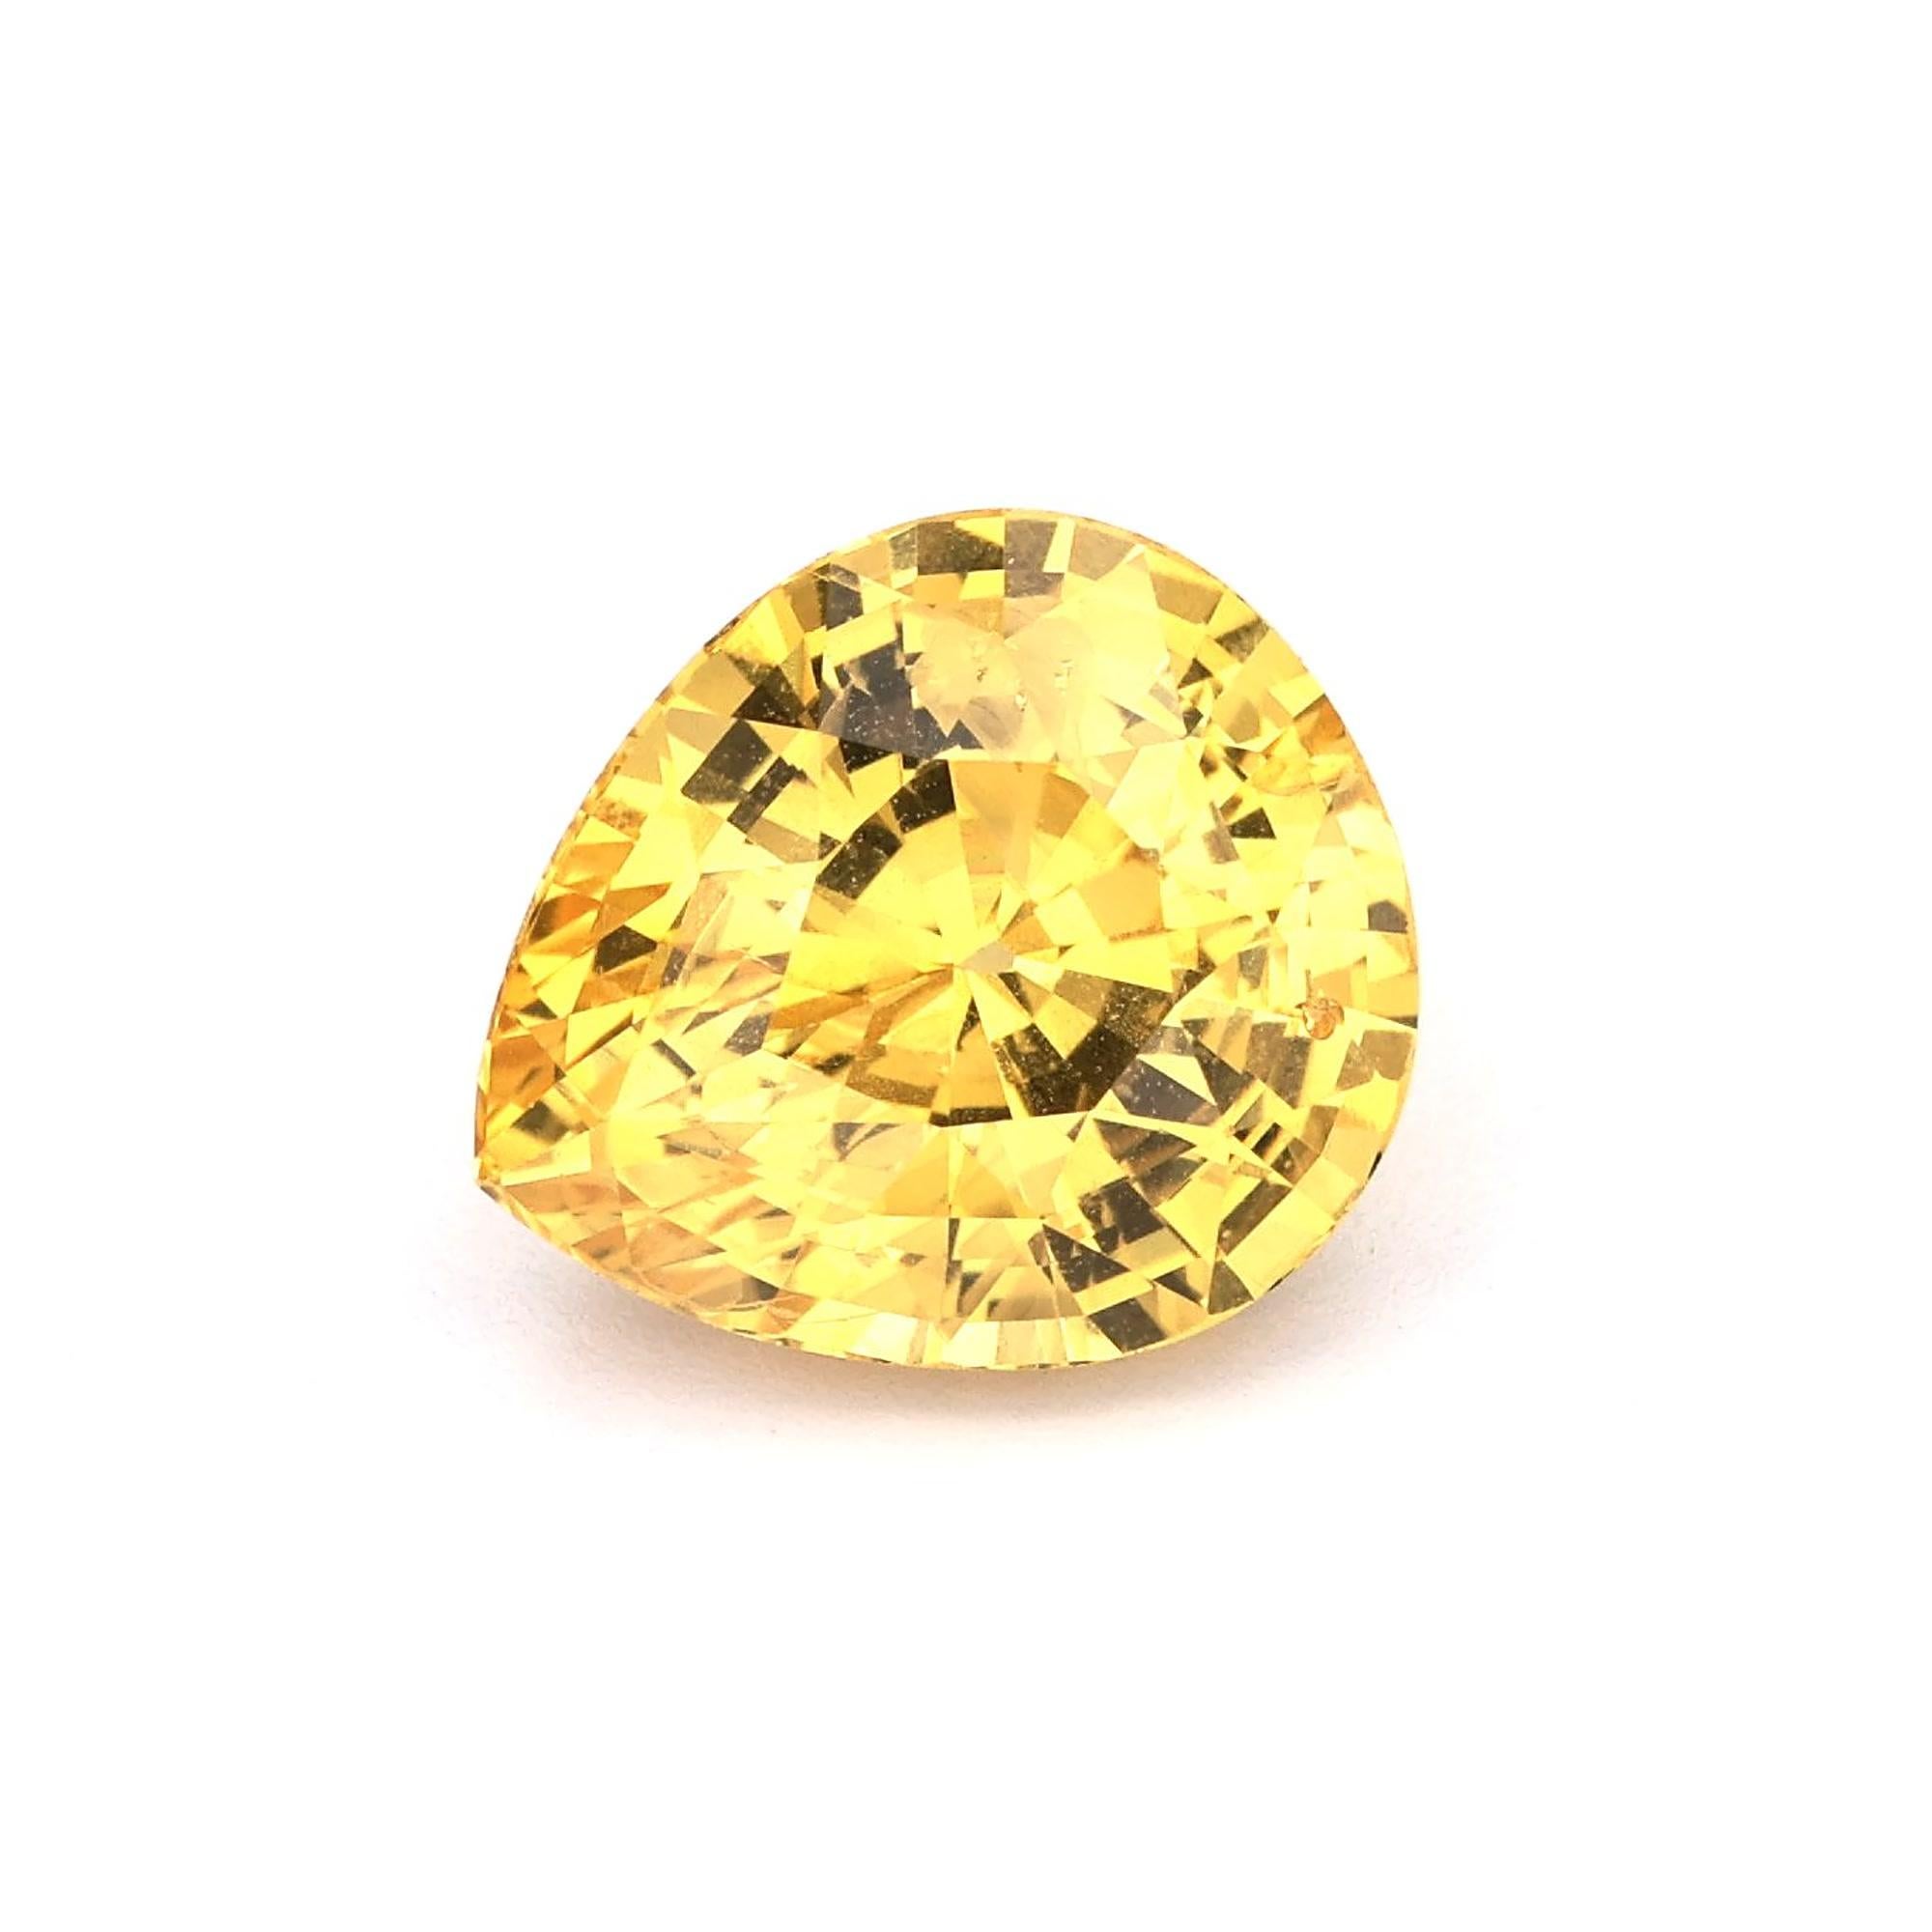 Natural Yellow Sapphire Pear shape Gemstone, This exquisite gemstone originates from Ceylon (Sri Lanka), known for producing exceptional quality stones. With its internally flawless clarity.

• Variety: Yellow Sapphire 
• Origin: Sri Lanka